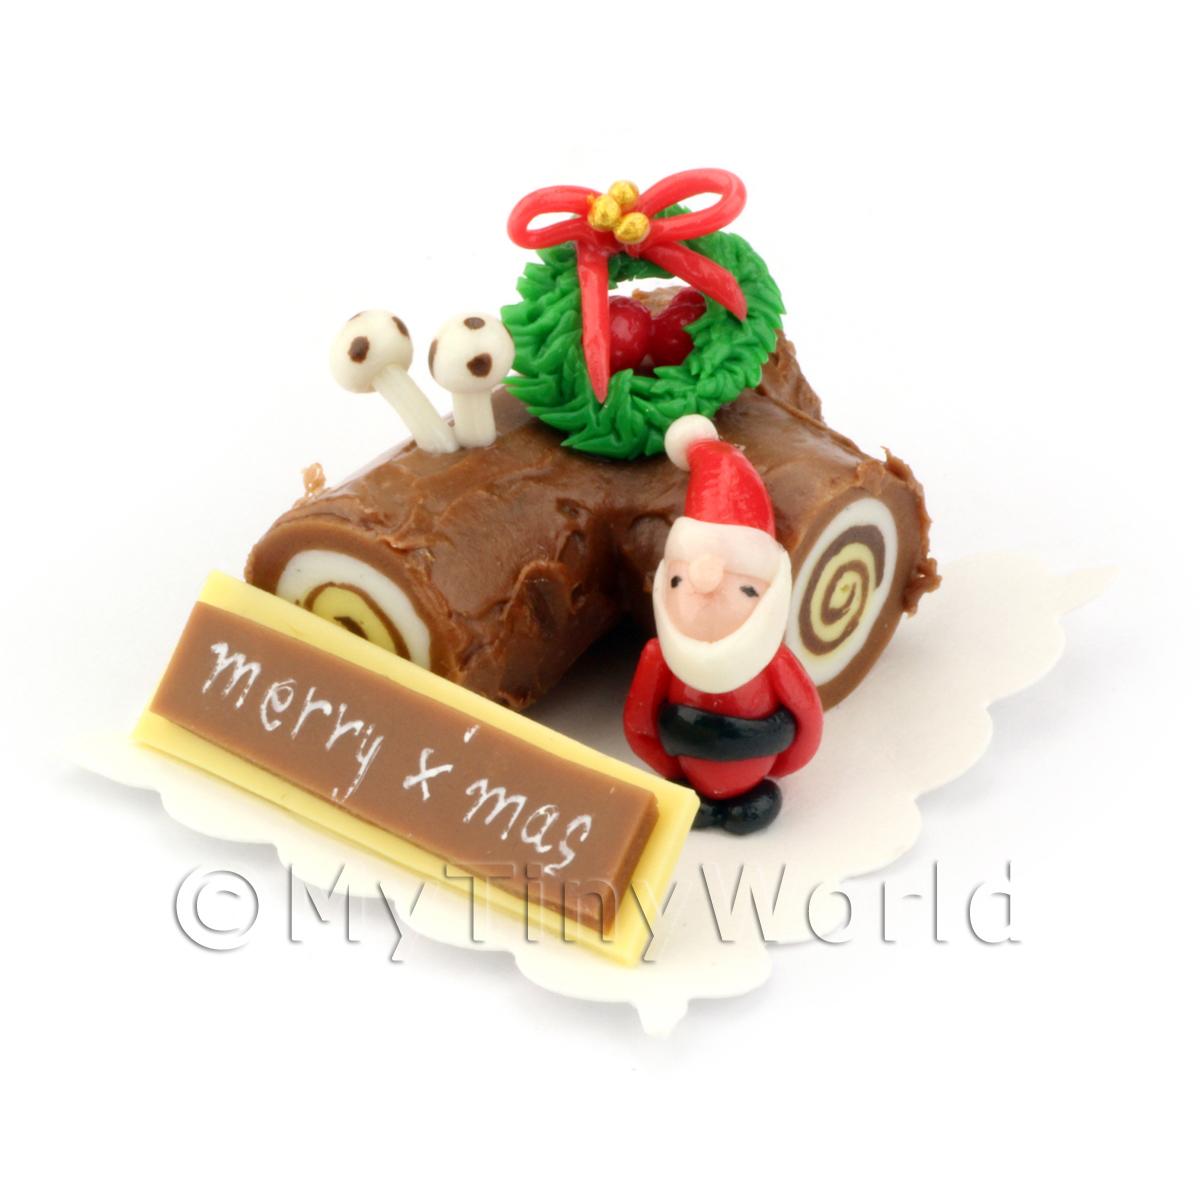 Miniature Yule Log Christmas Cake Dolls House Miniature Food Bakery Item  for Doll House 1:12 Scale Polymer Clay MTO -  Sweden